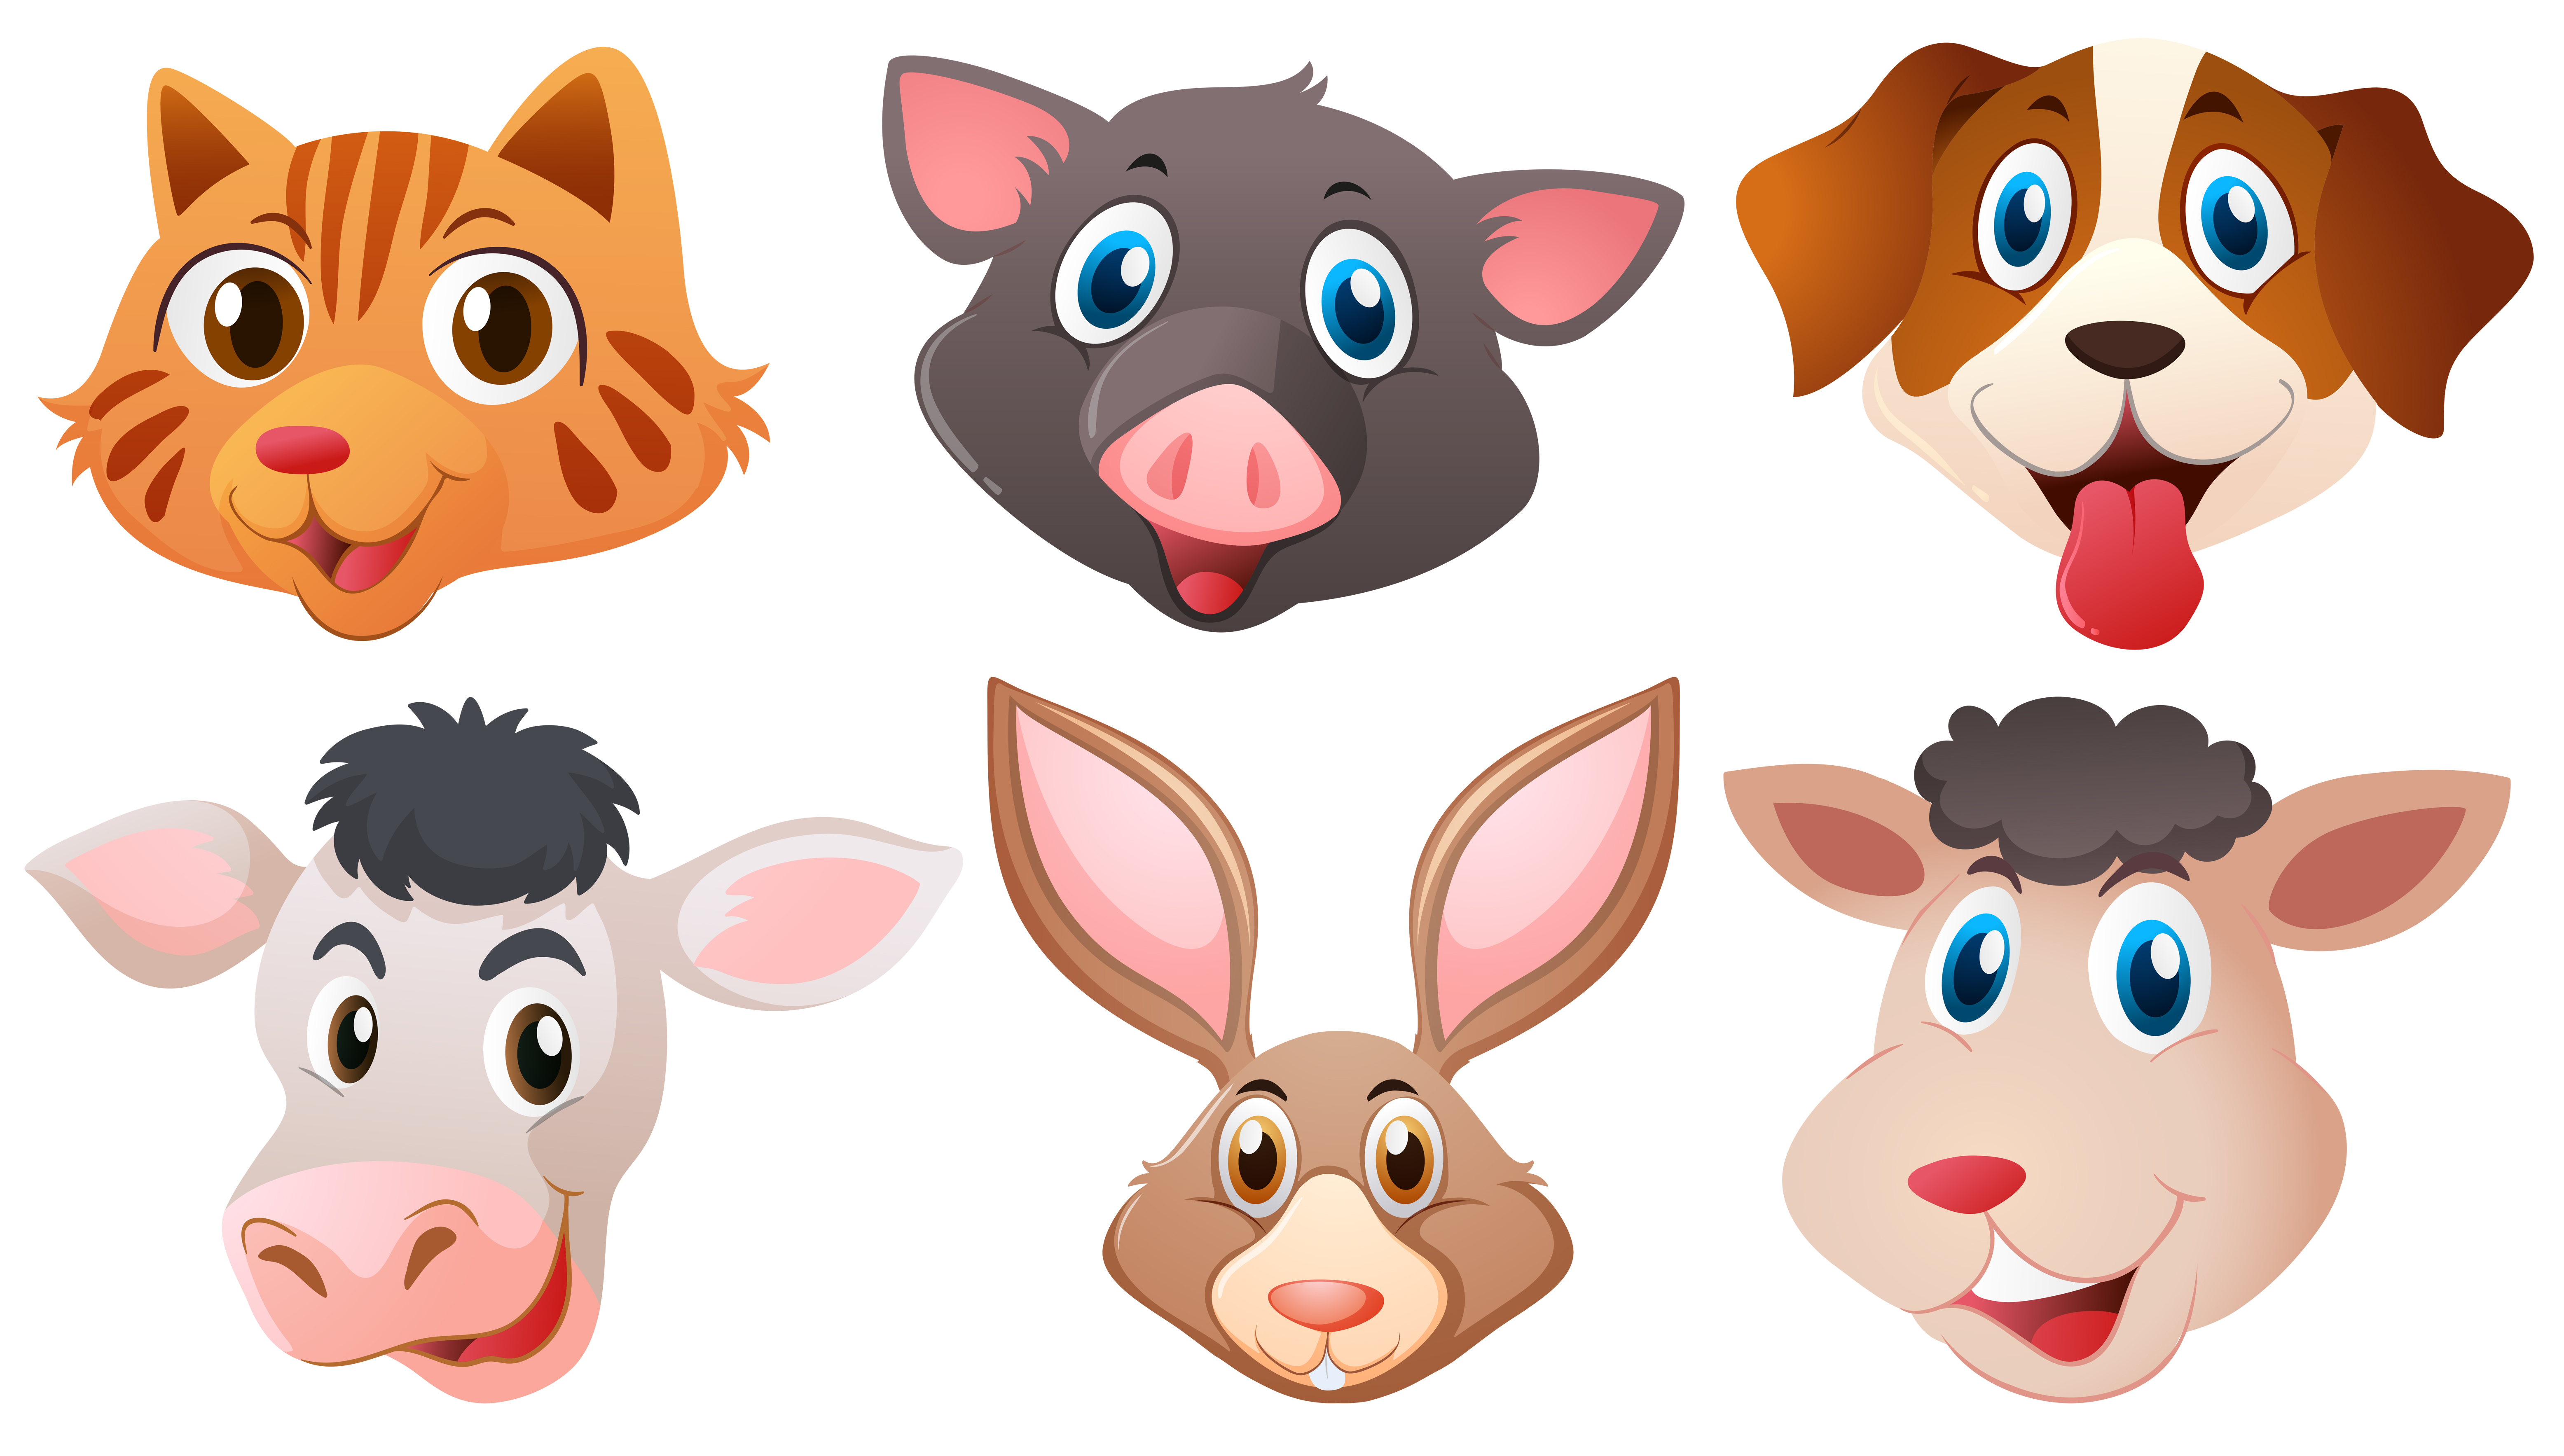 Download Different heads of cute animals - Download Free Vectors, Clipart Graphics & Vector Art